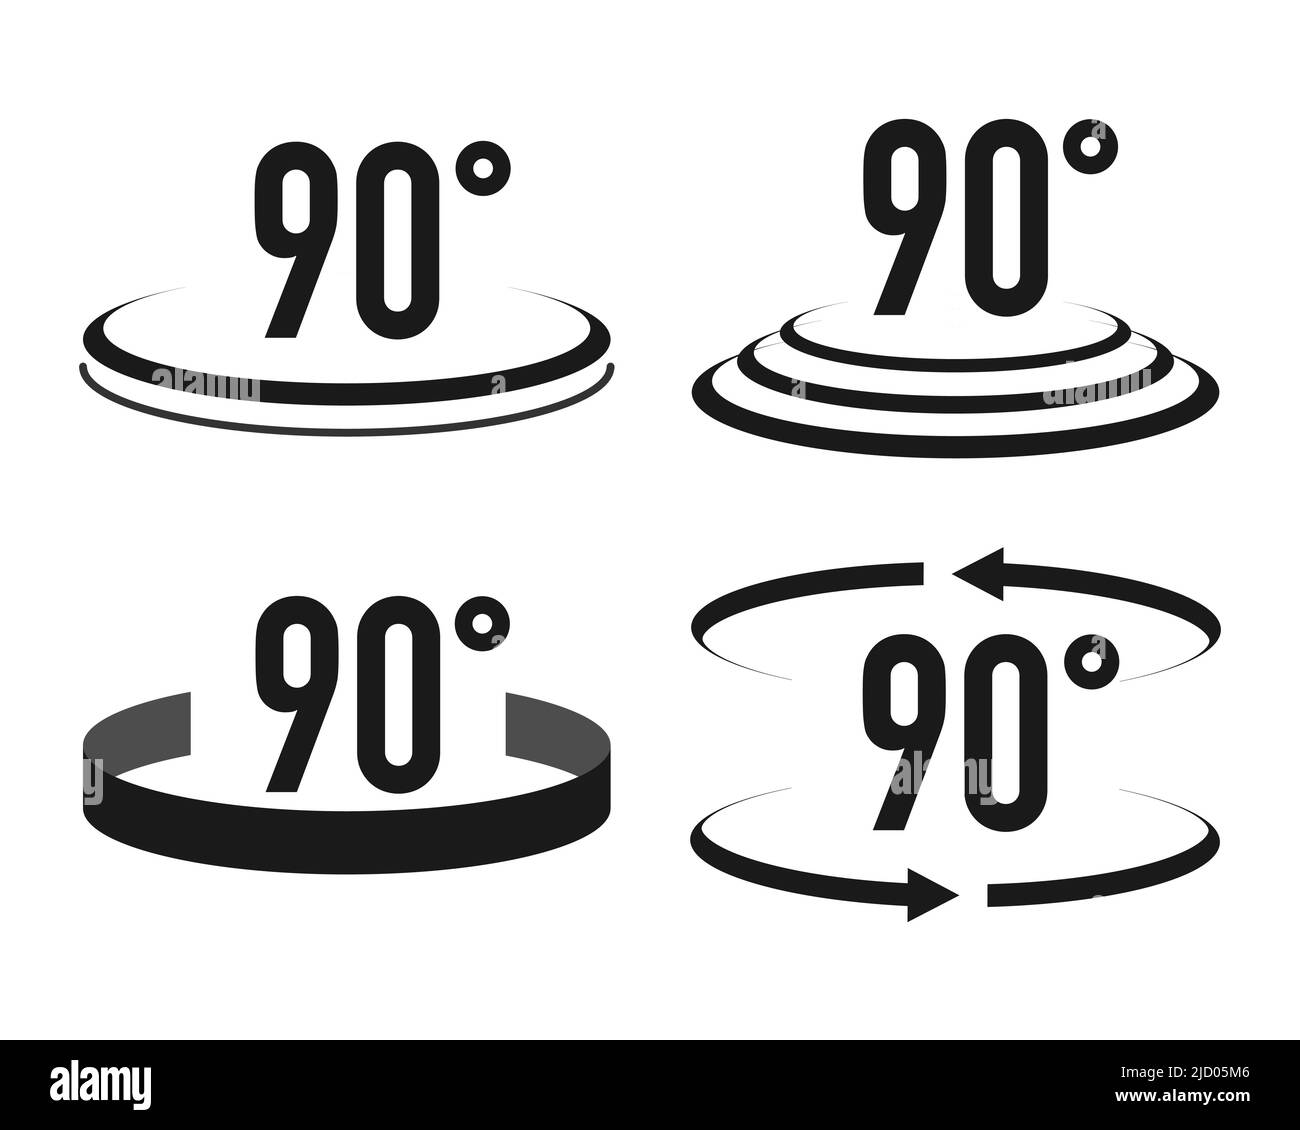 45 degree sign Black and White Stock Photos & Images - Alamy